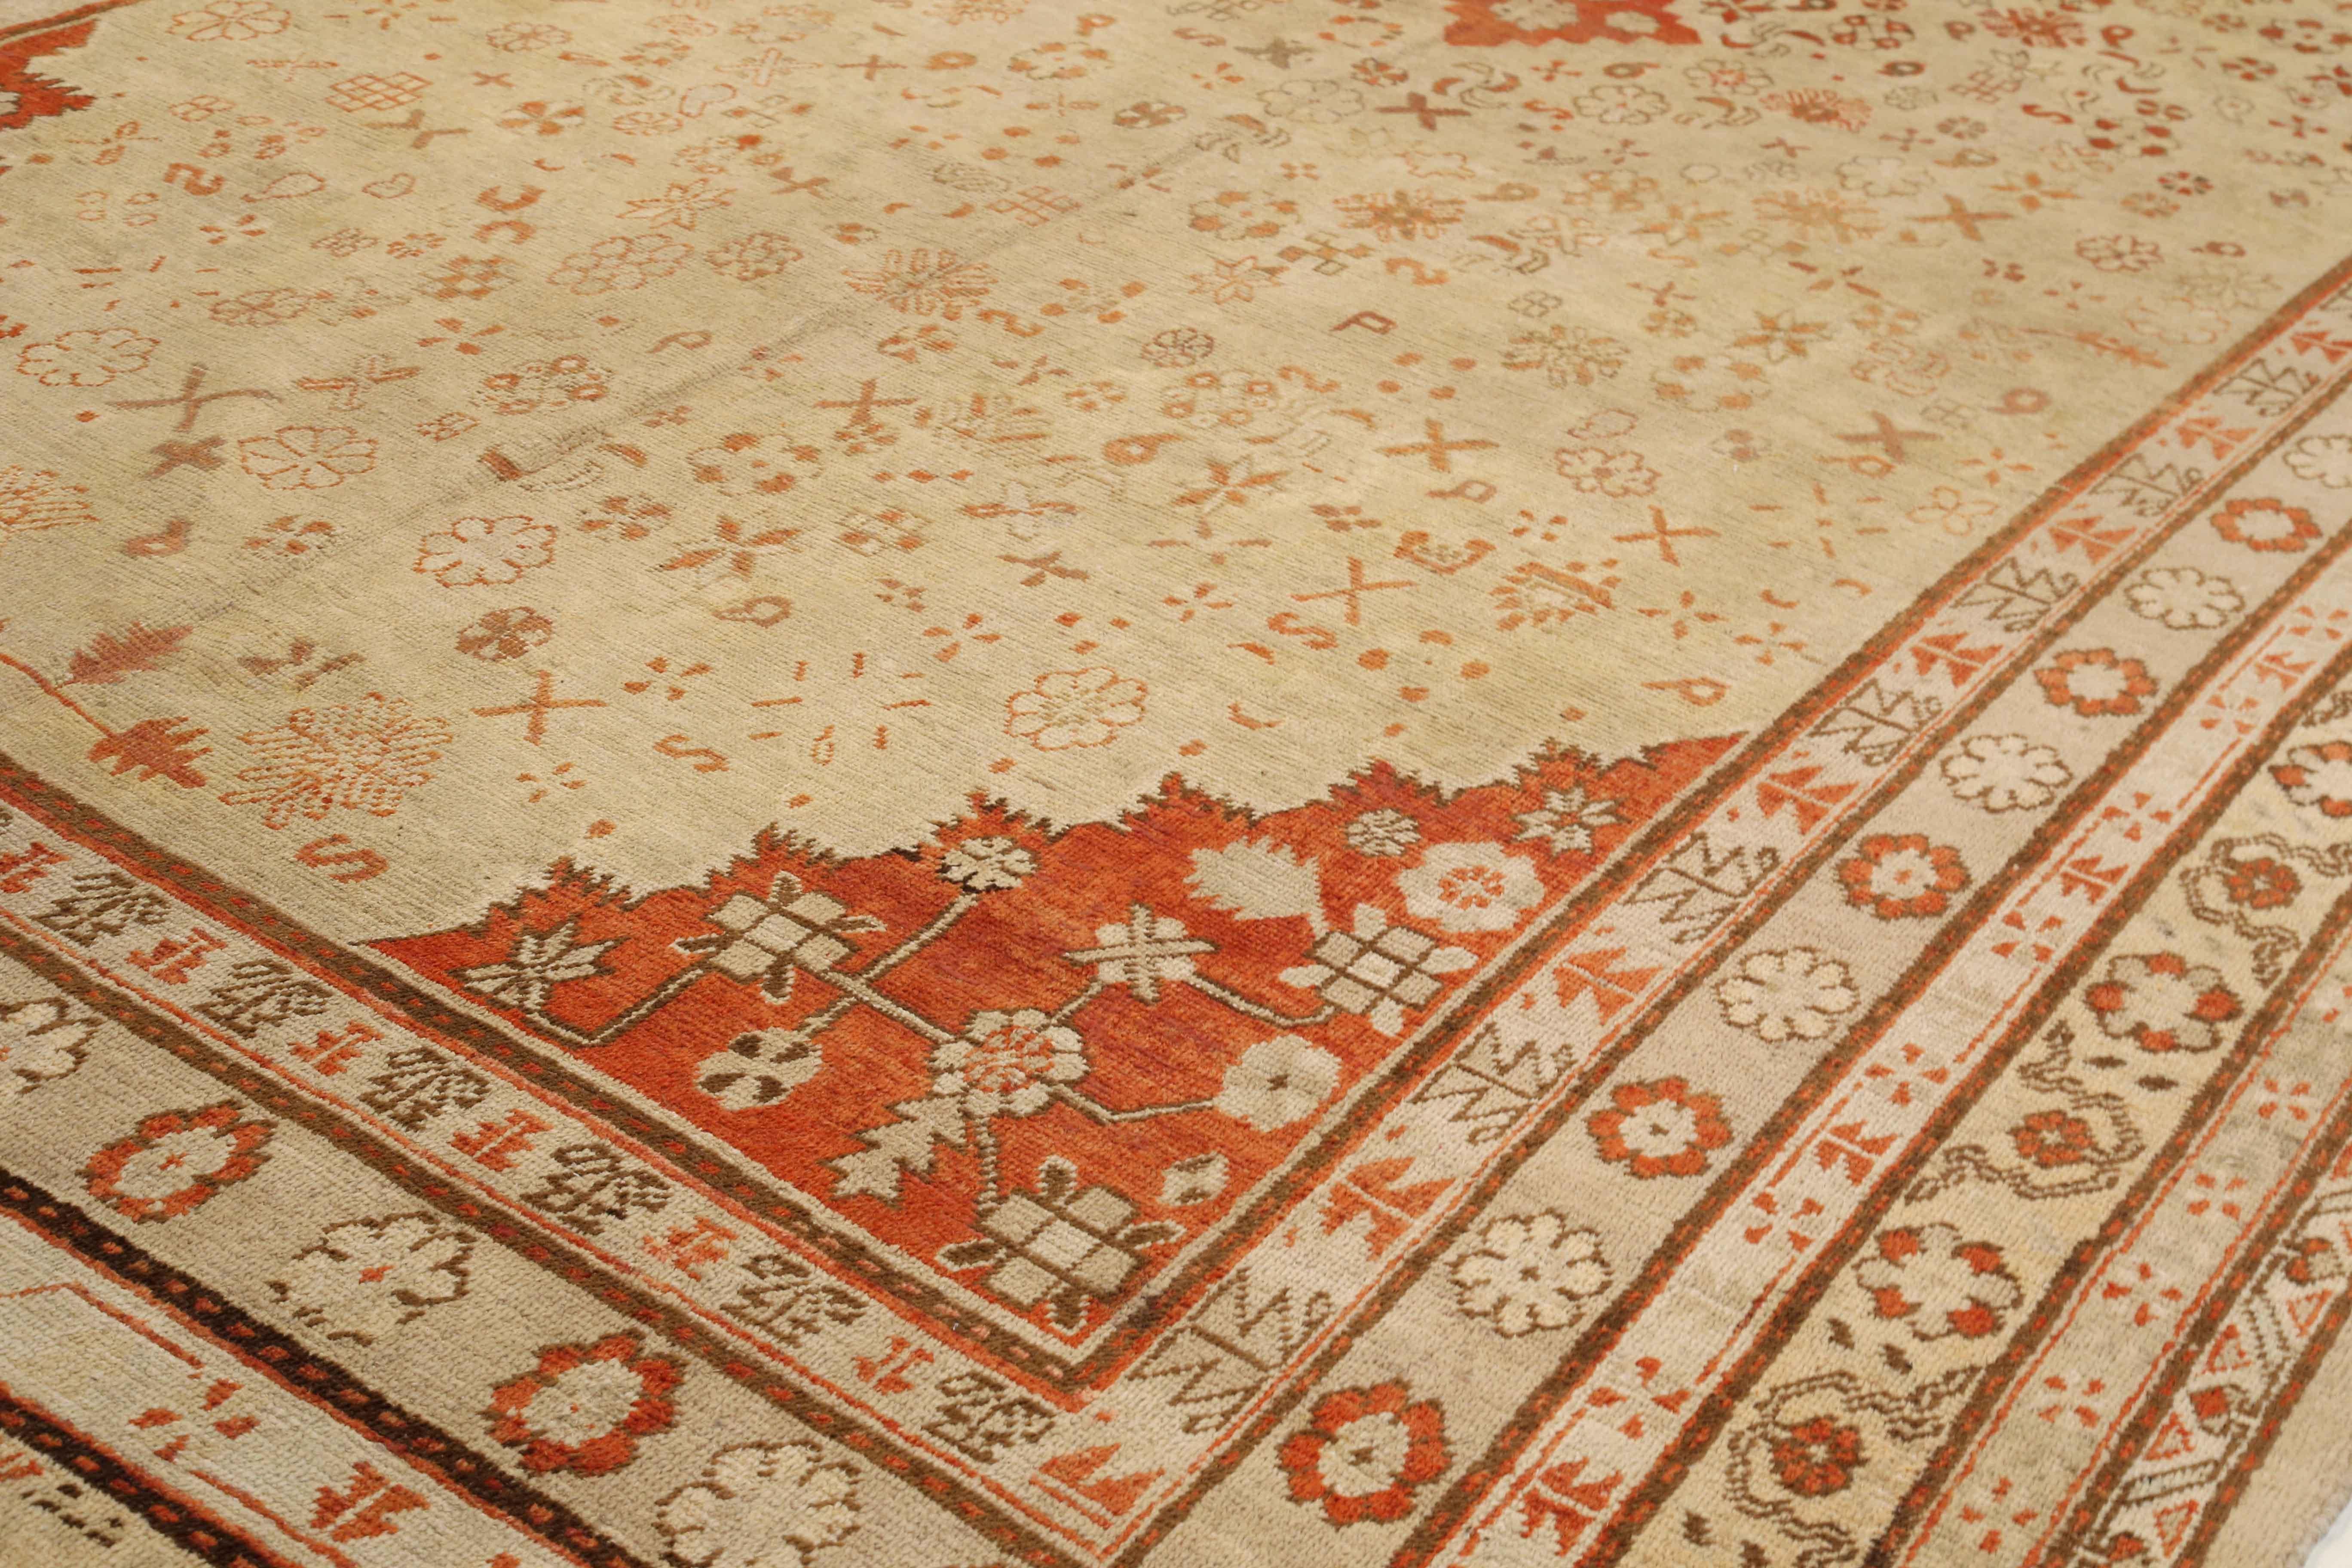 antique central asian rugs